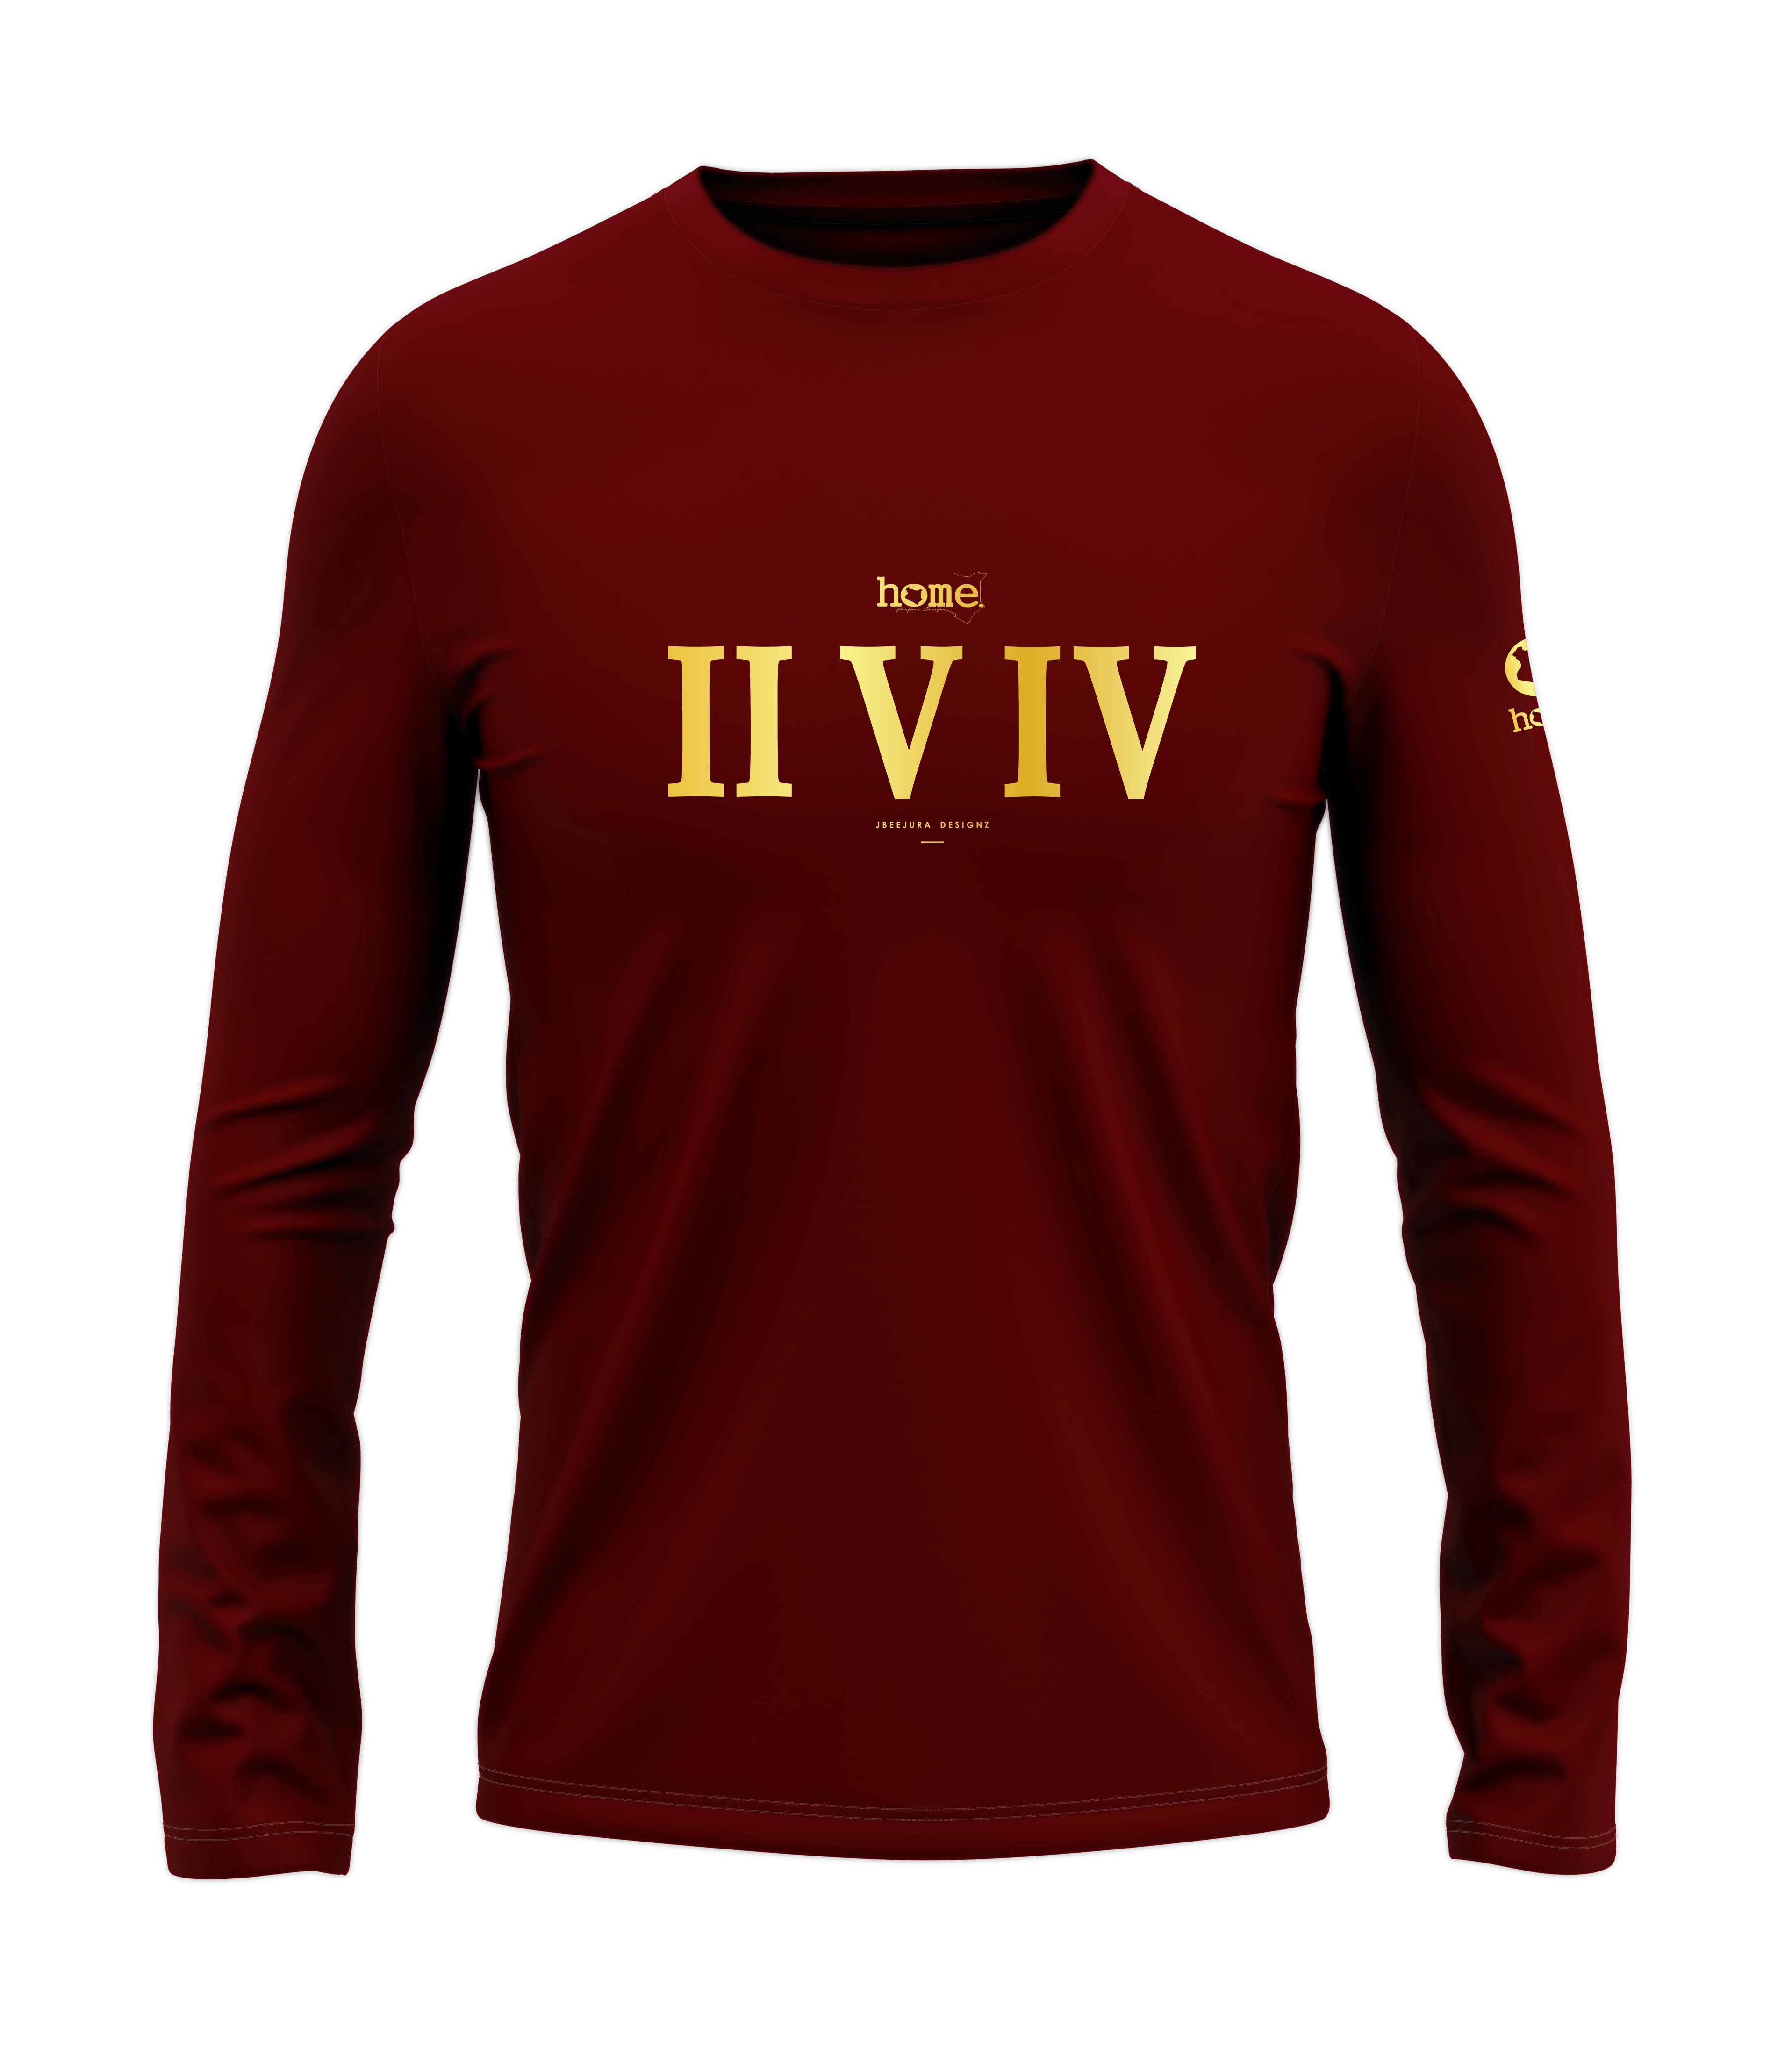 home_254 LONG-SLEEVED MAROON RED T-SHIRT WITH A GOLD ROMAN NUMERALS PRINT – COTTON PLUS FABRIC